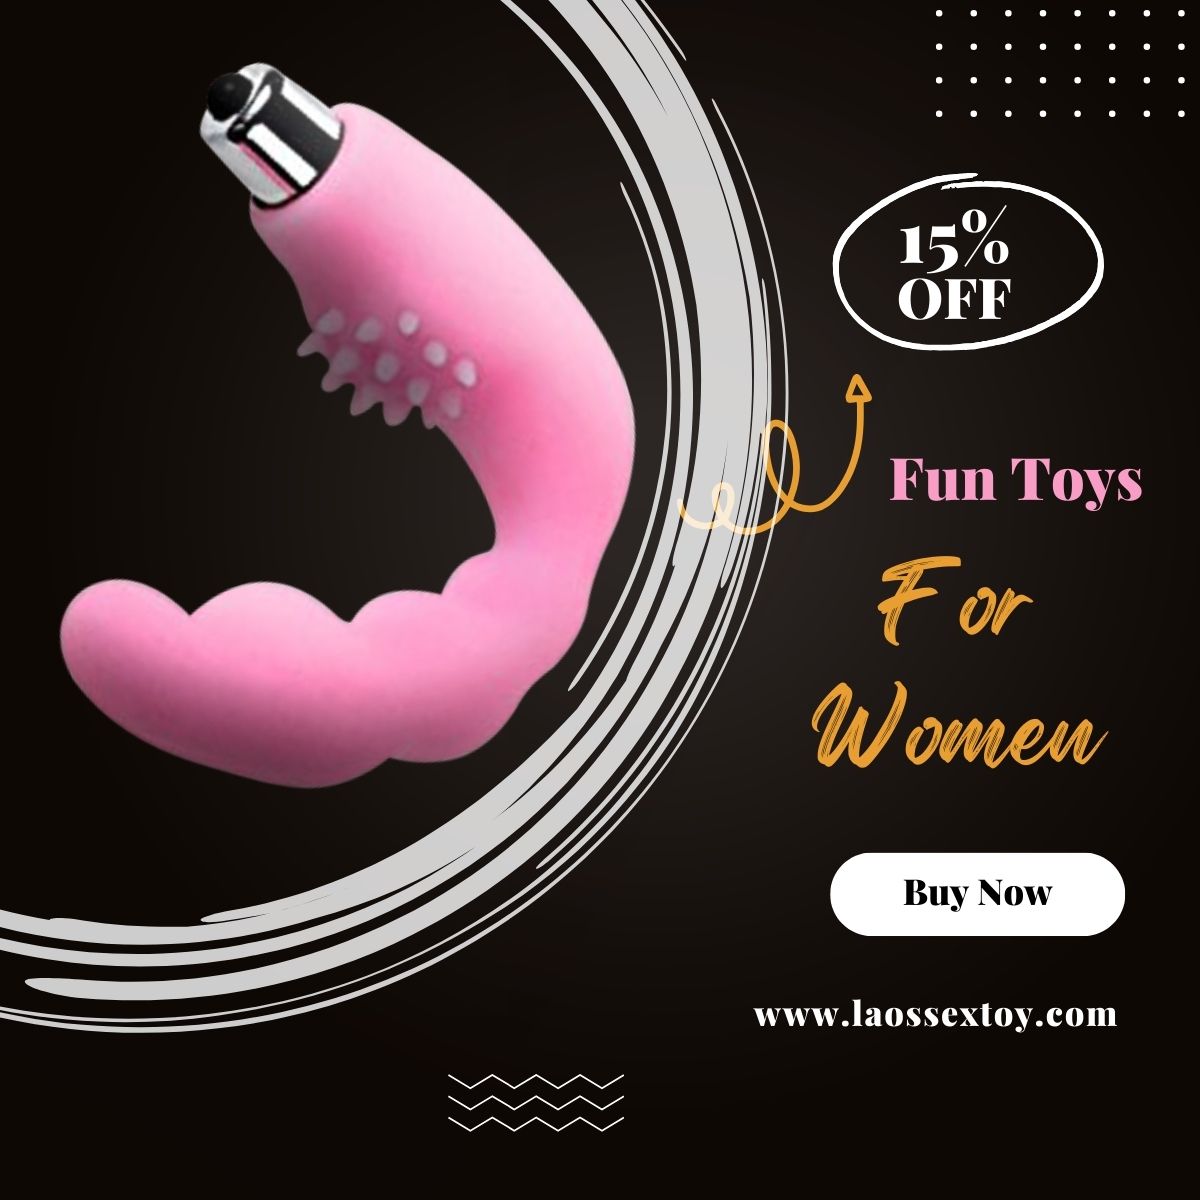 These fun toys in Luang Namtha come in cool designs and fruity flavors, making your intimate moments more enjoyable and putting you in a better mood in bed.
WhatsApp us: api.whatsapp.com/send?phone=668…

#AdultSocial #Adultery #adultarts #adultstore #pleasures #Sensational #onlinestore